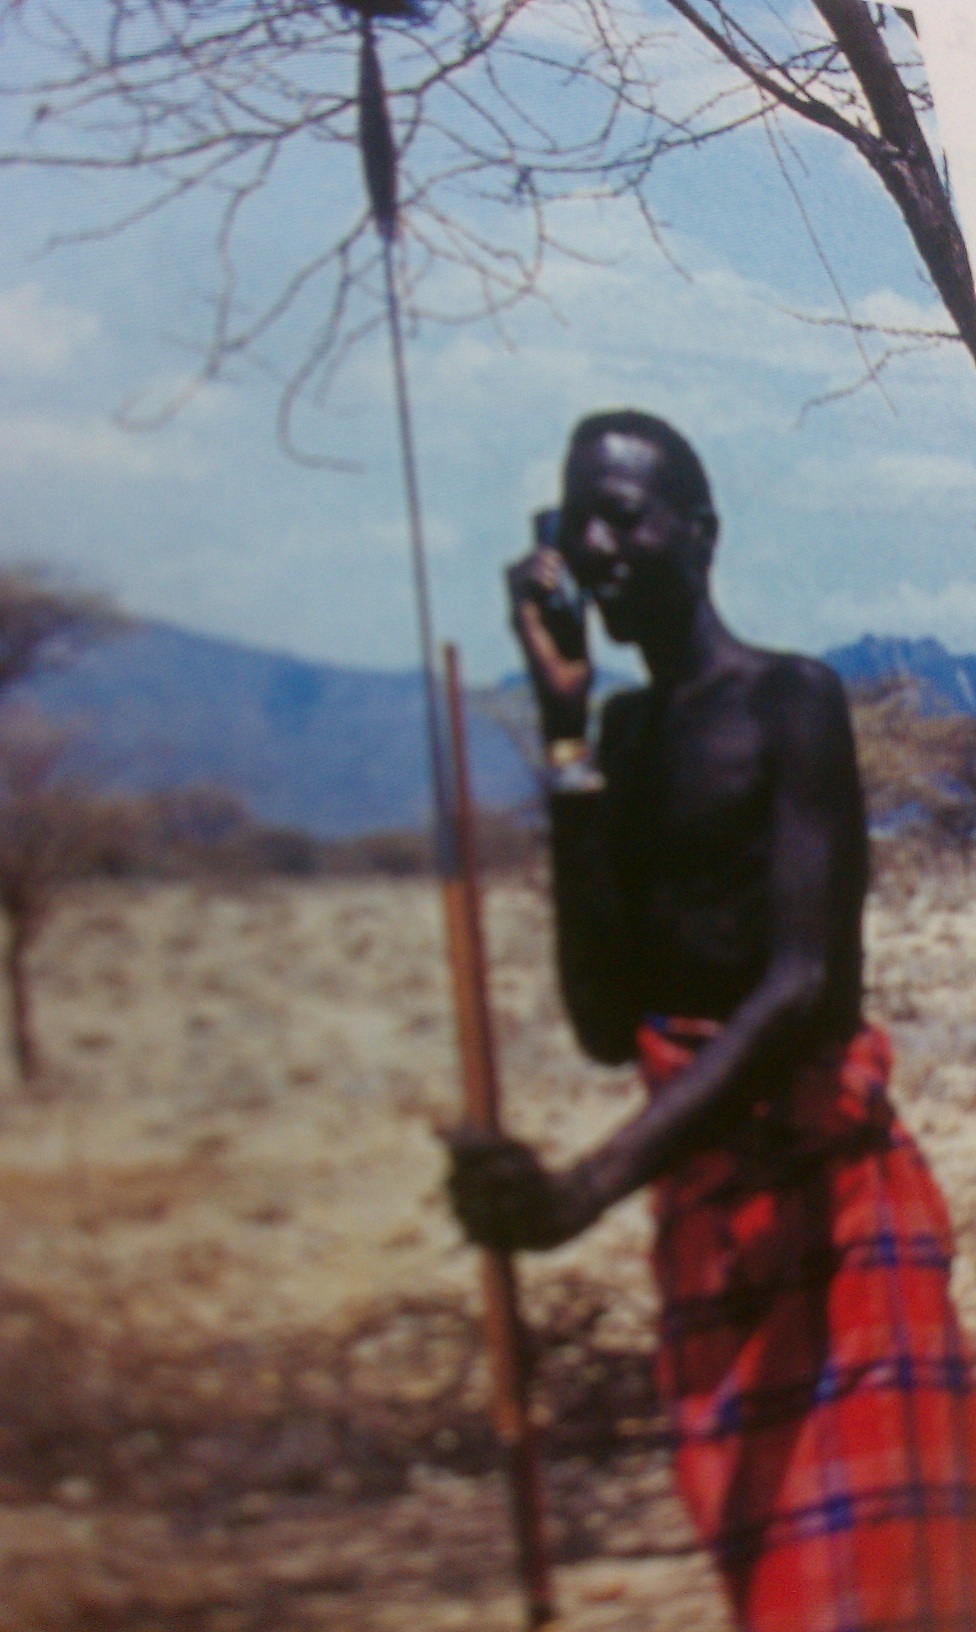 Why does this guy need a phone???I Found this picture in my history book, WTF?